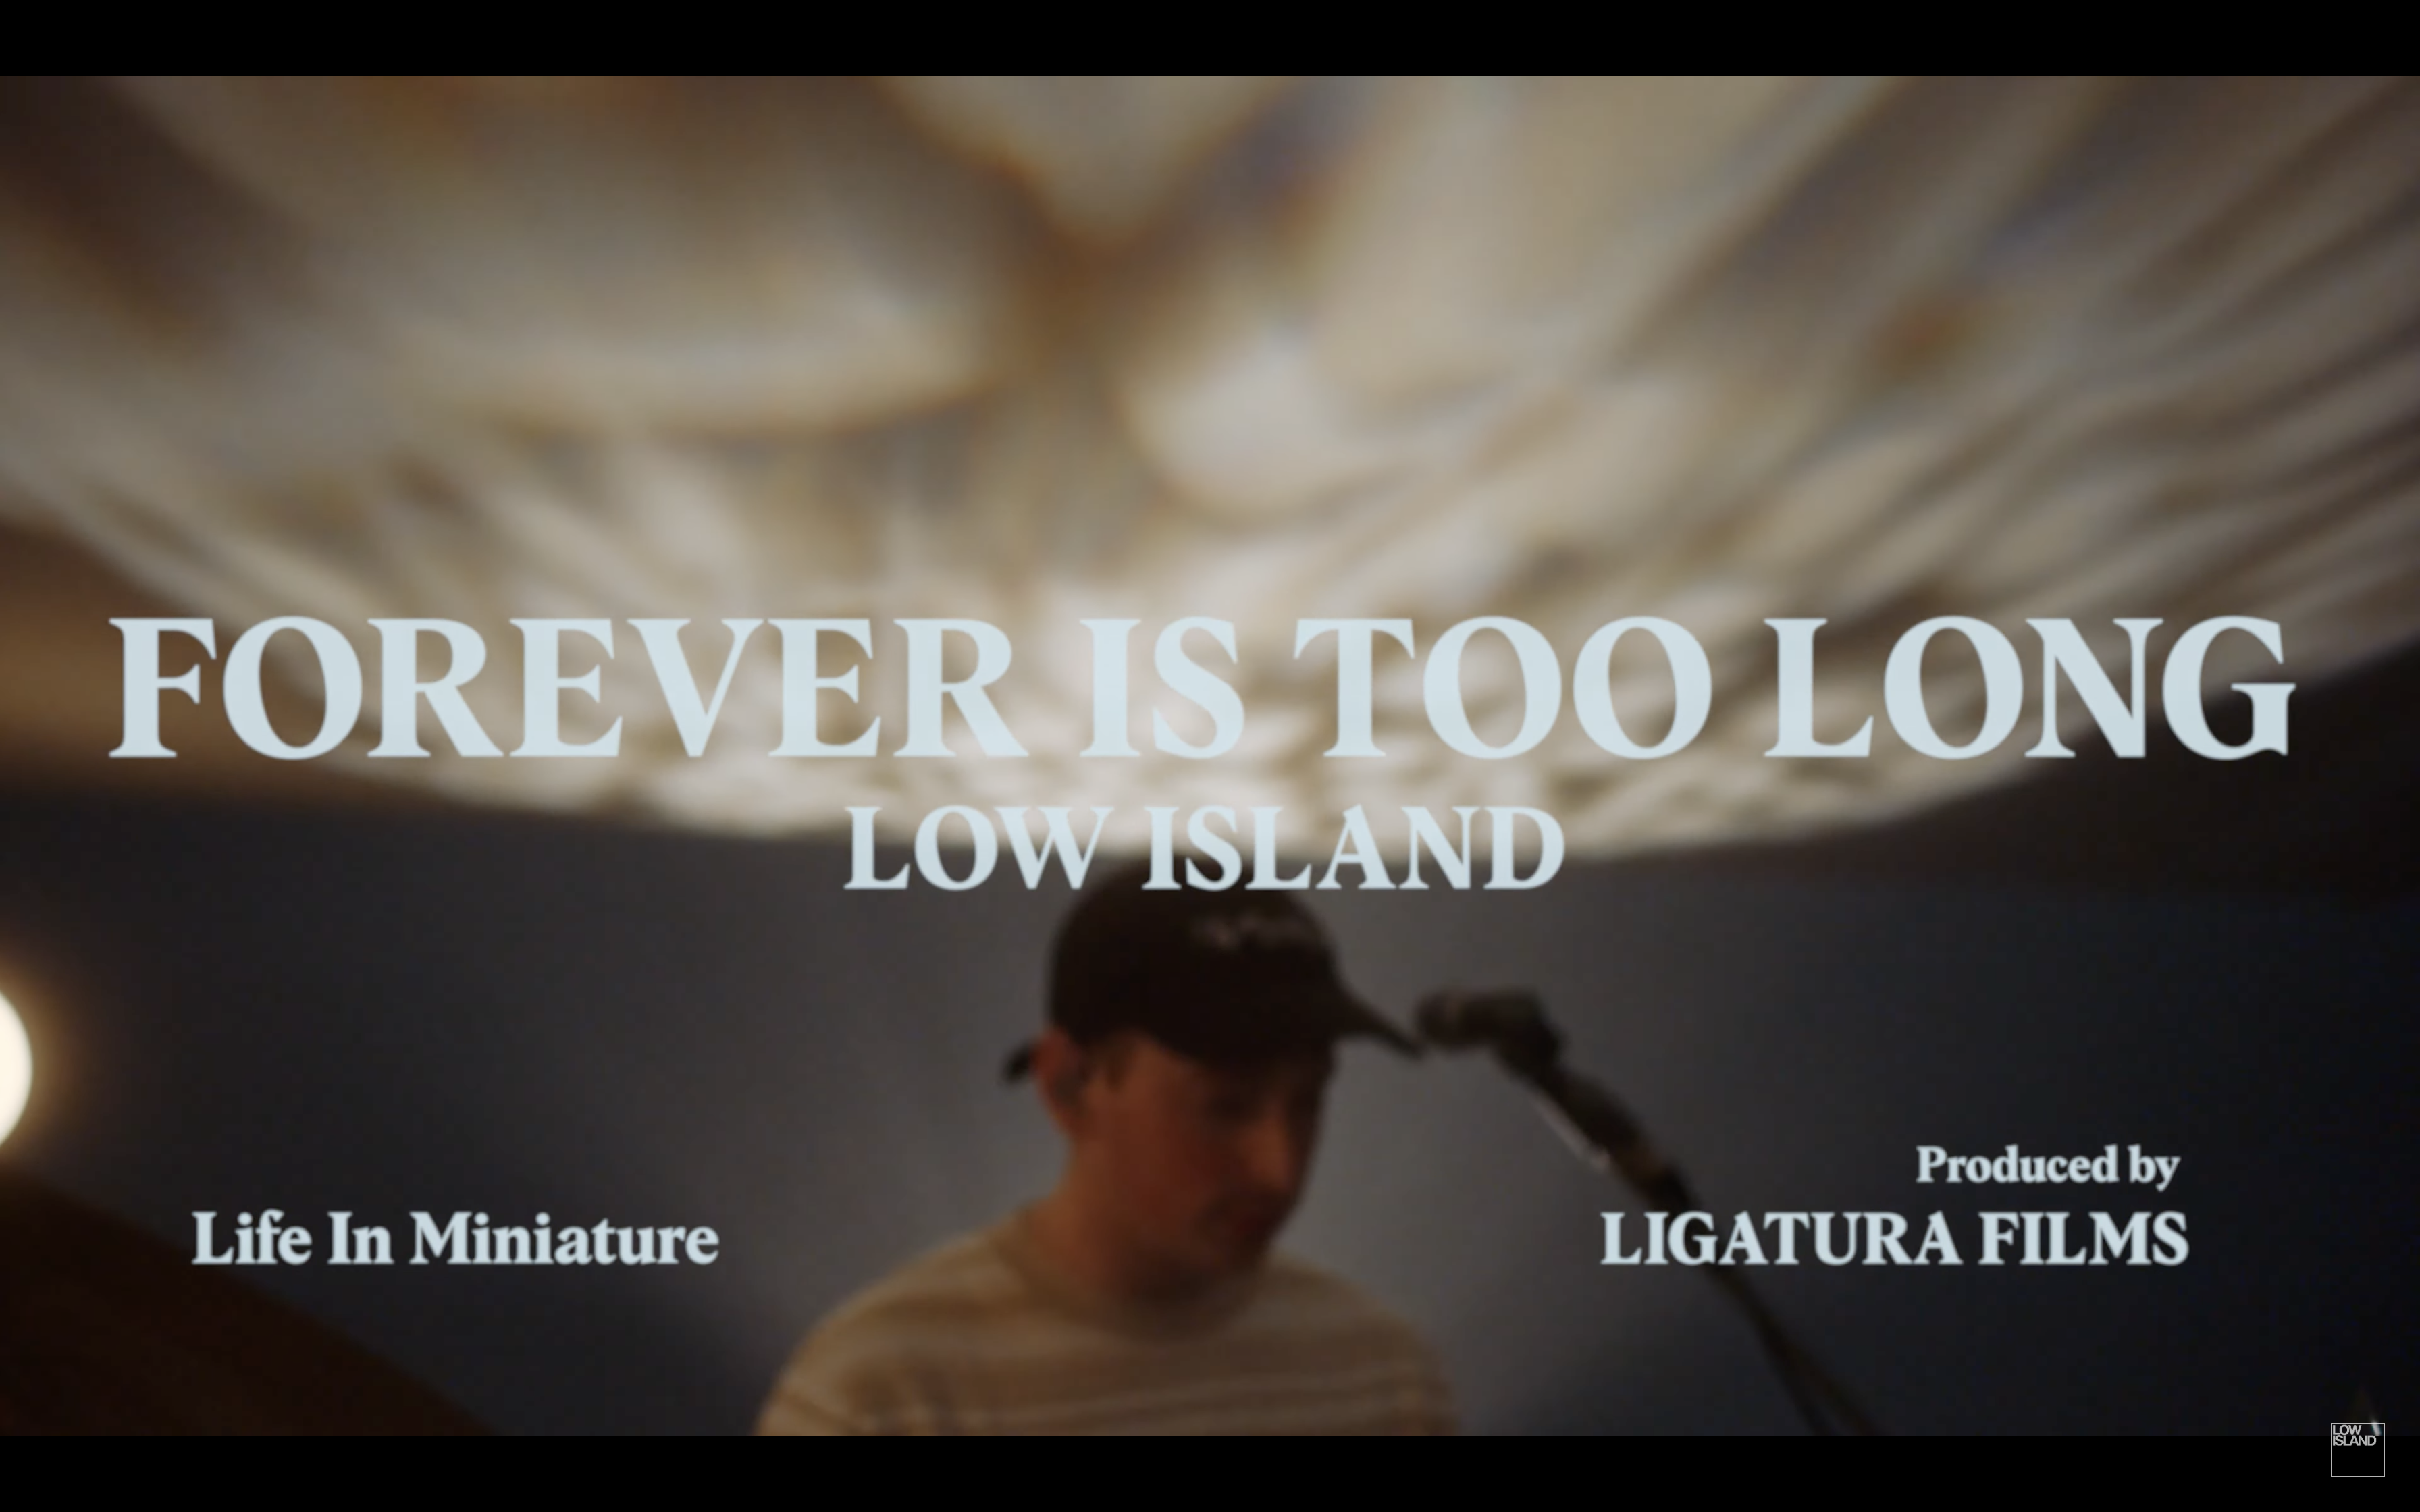 LOW ISLAND Forever Is Too Long